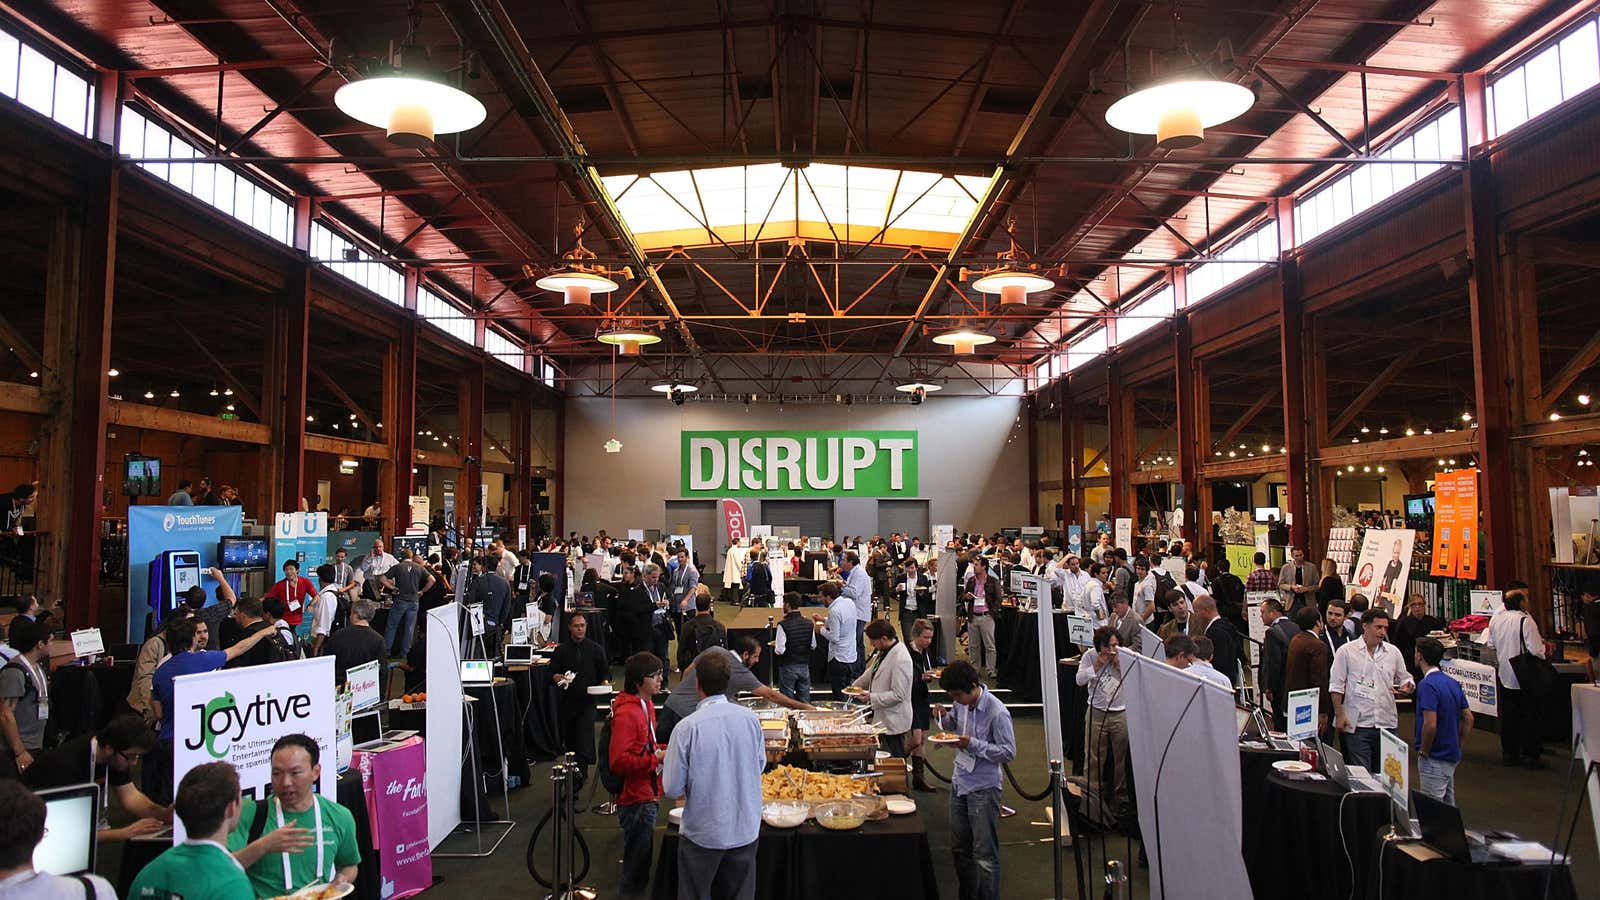 This year’s TechCrunch Disrupt conference in San Francisco.